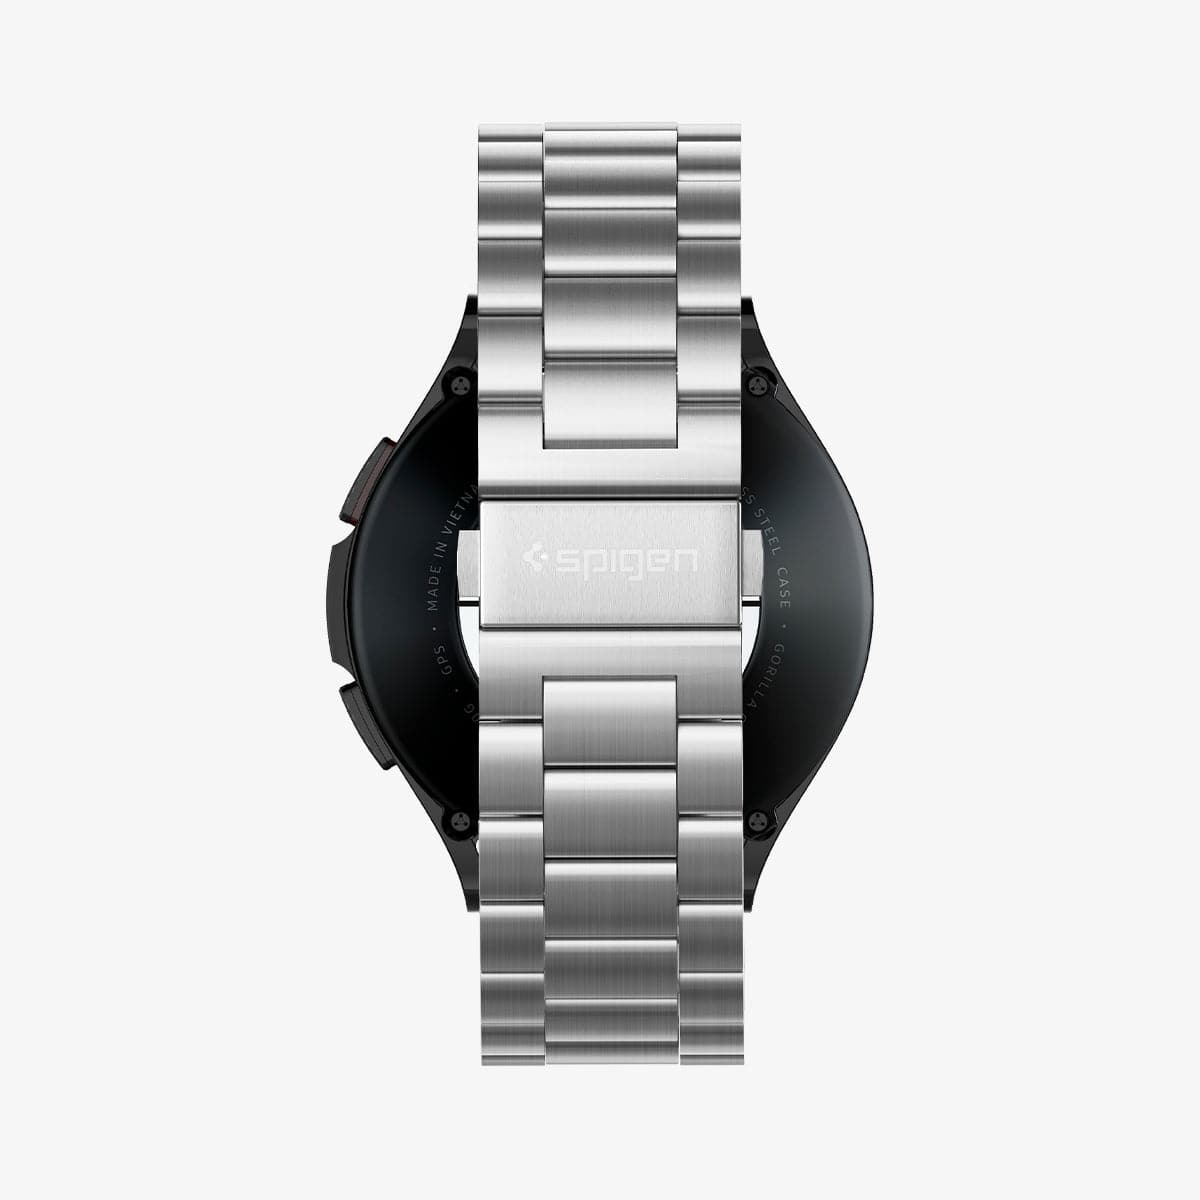 600WB24981 - Galaxy Watch Band (22mm) Modern Fit in silver showing the back